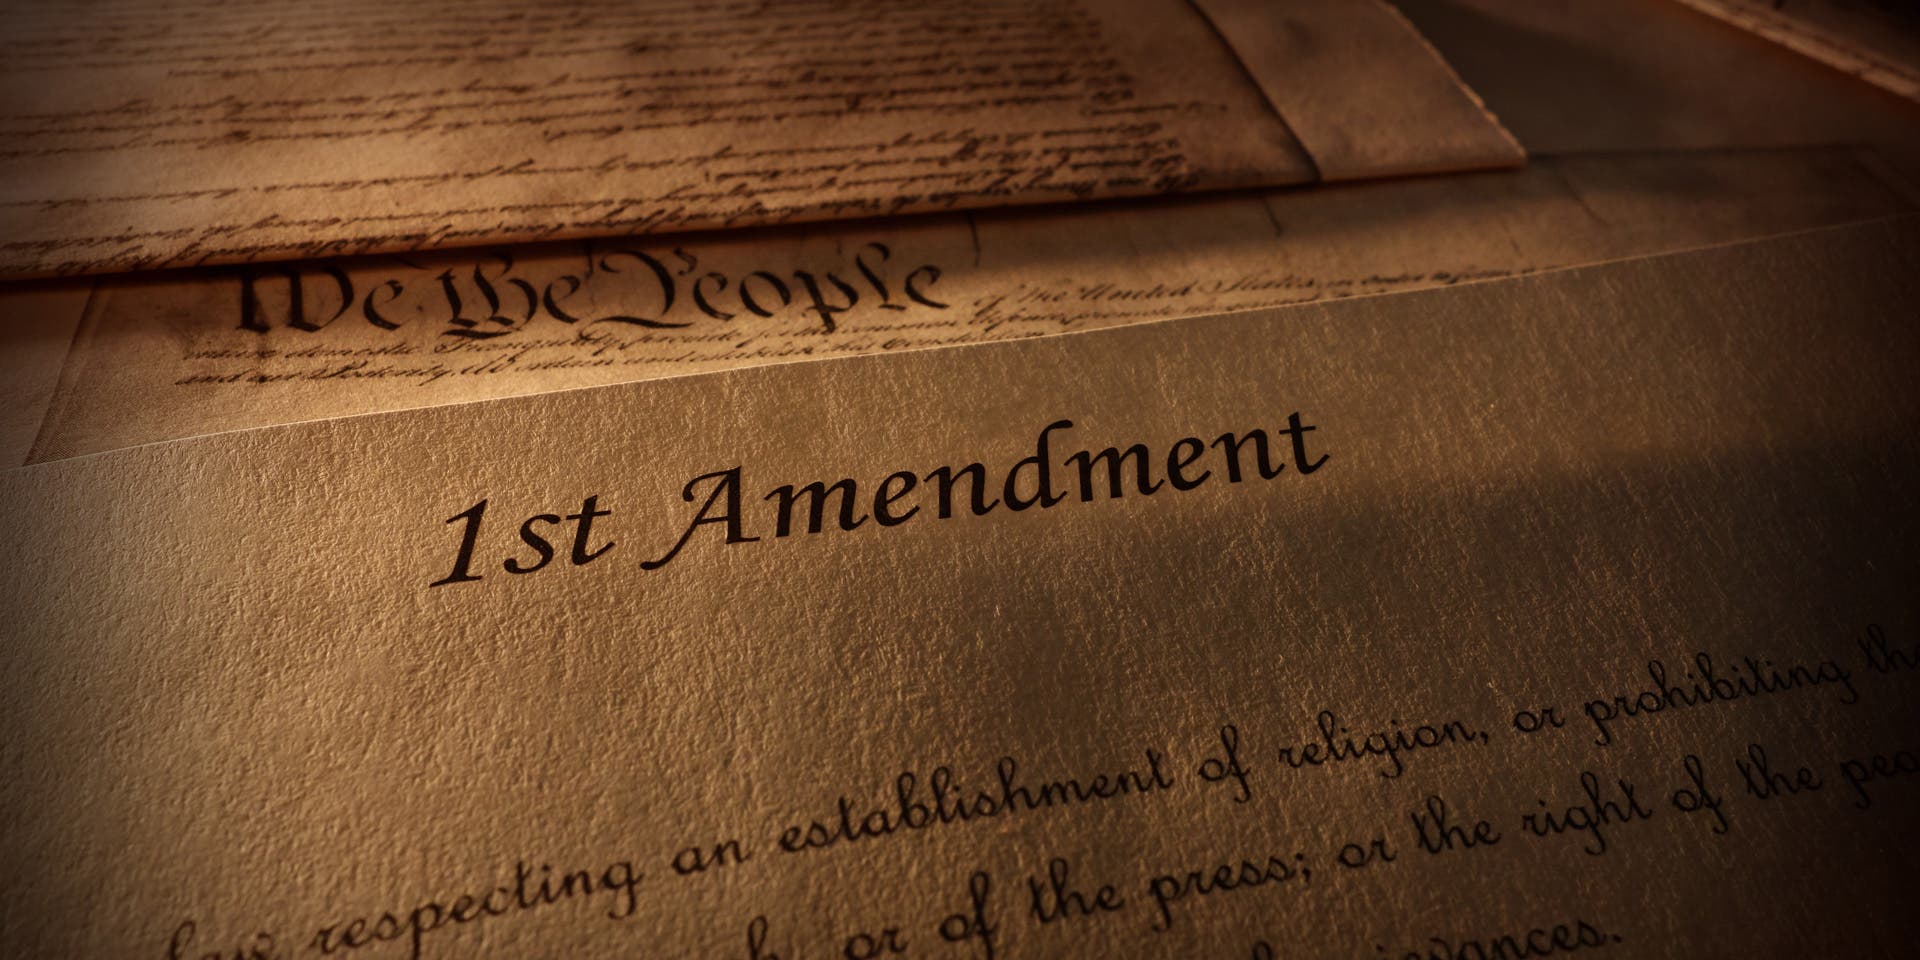 HISTORY: First Amendment of the US Constitution